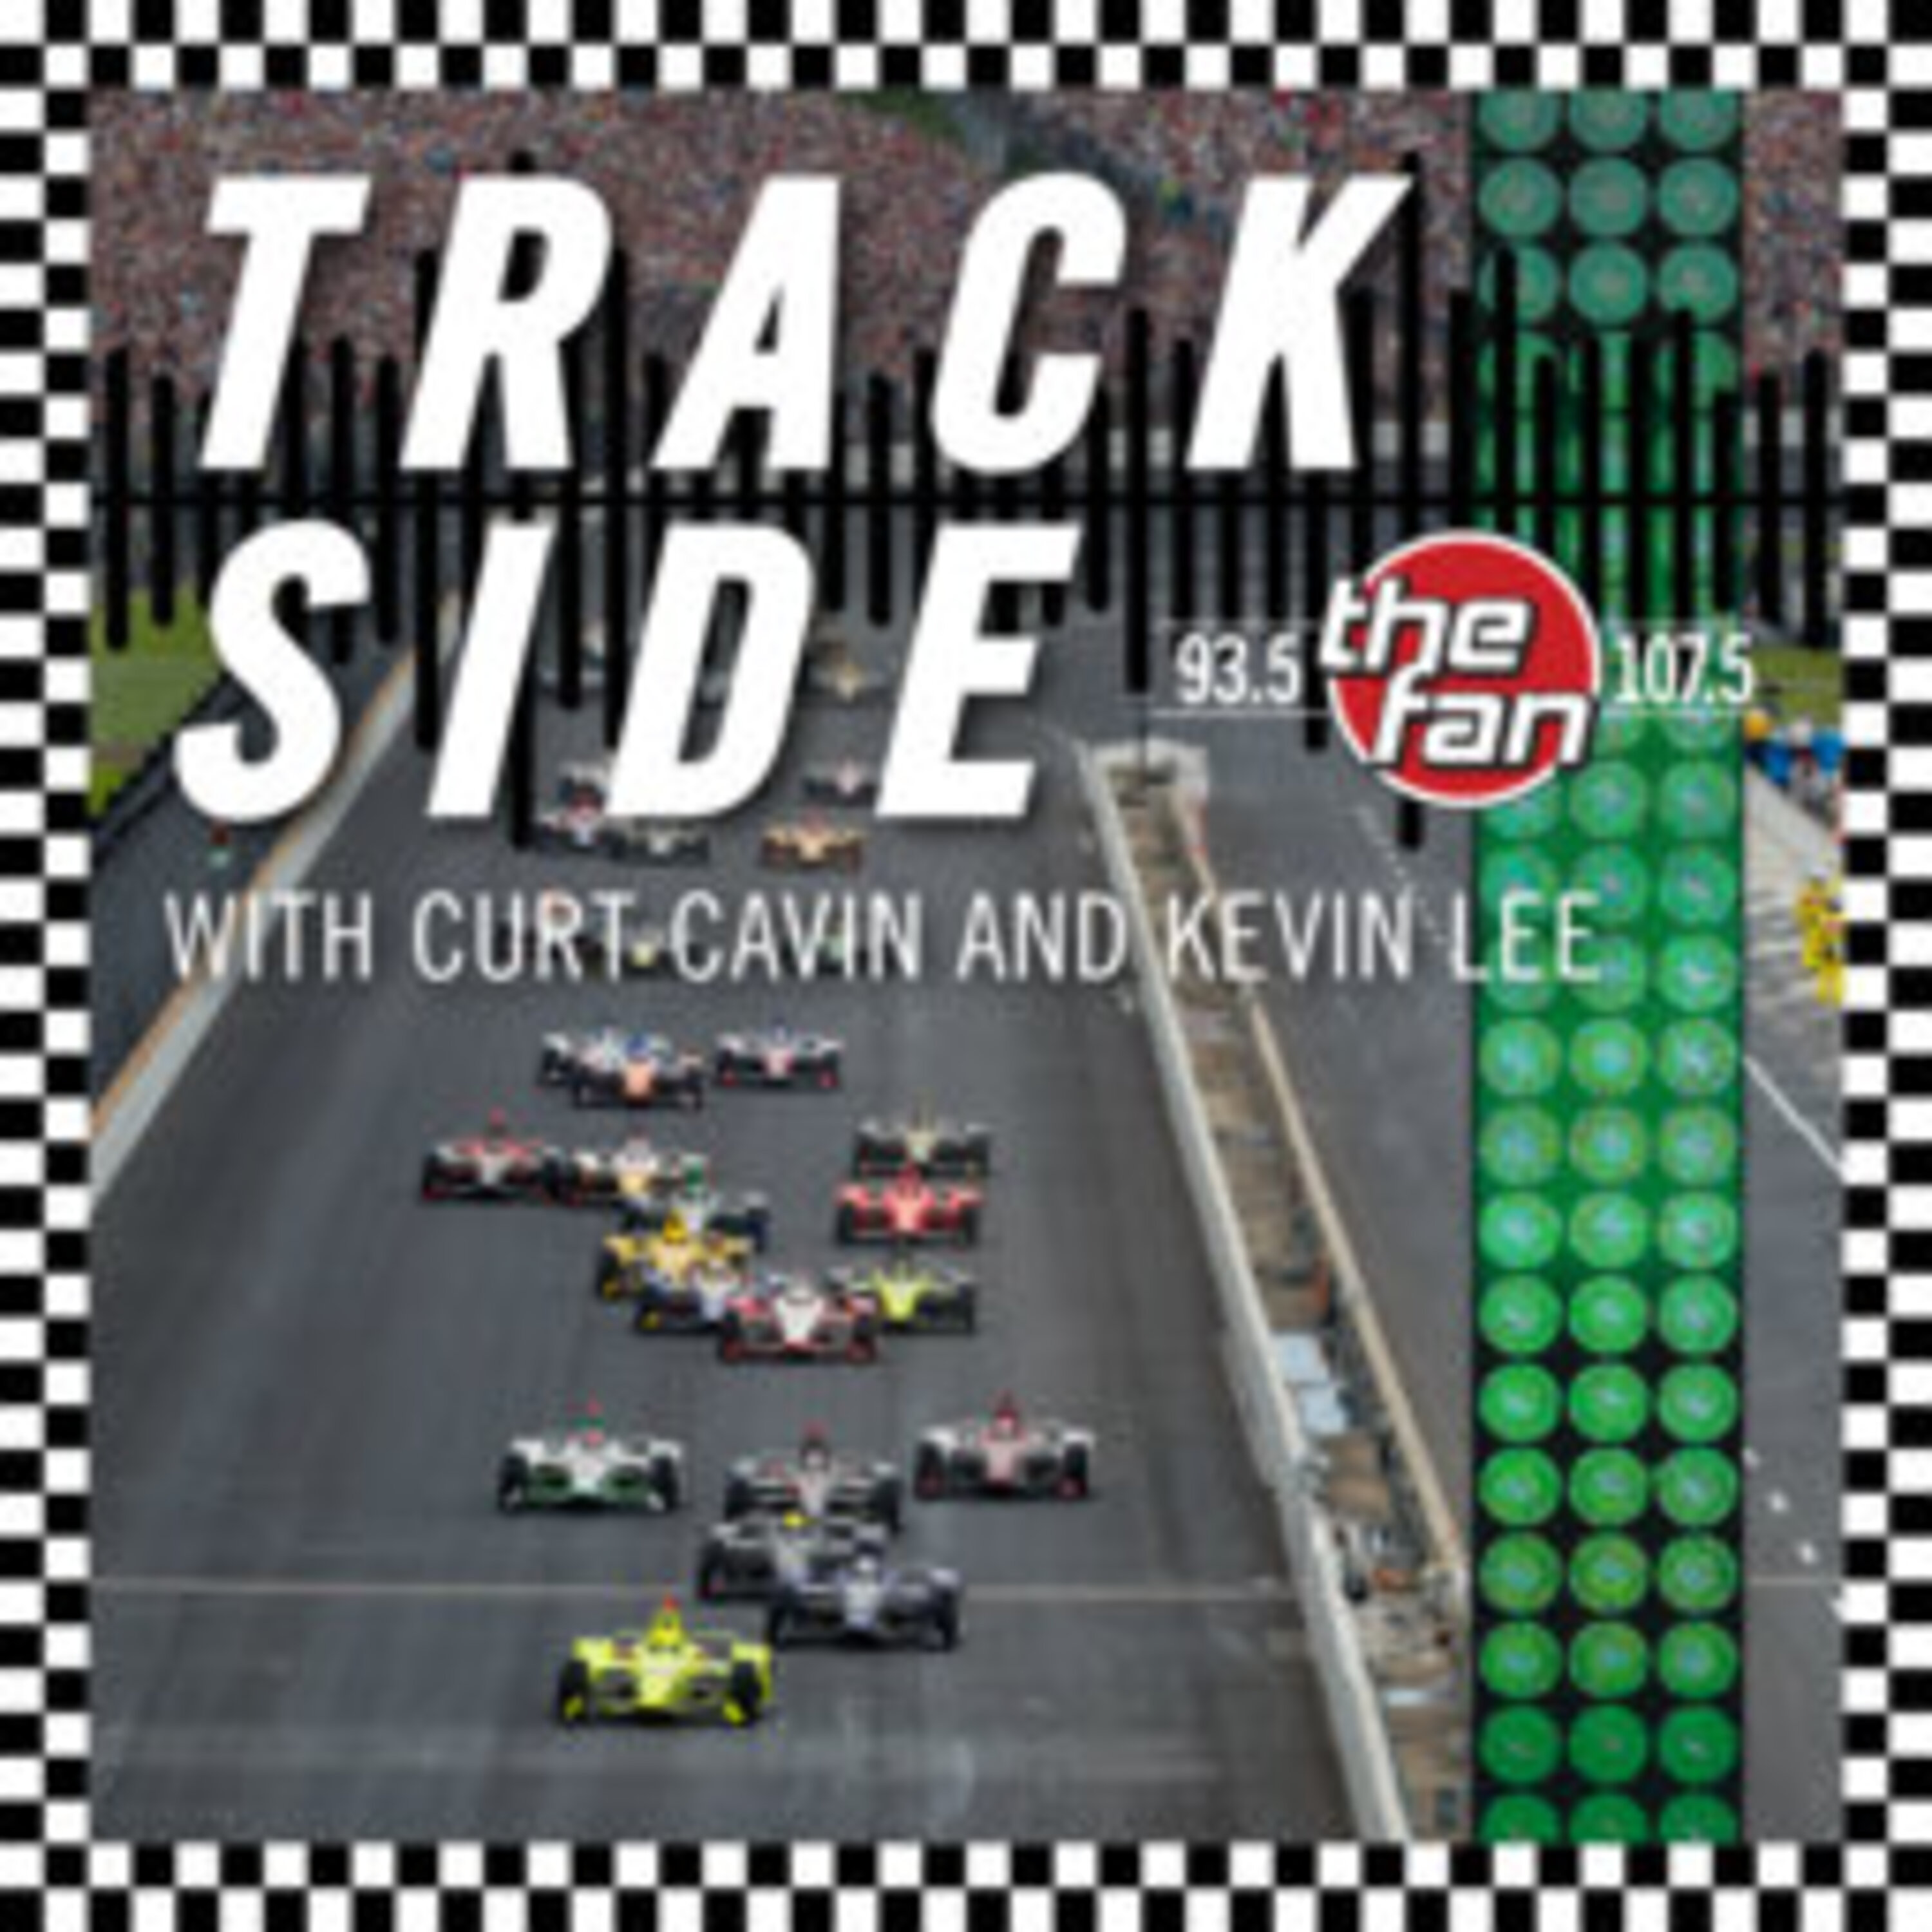 Curt and Kevin Talk About Kyle Larson, Ken Griffey Jr. Driving the Pace Car, and more!